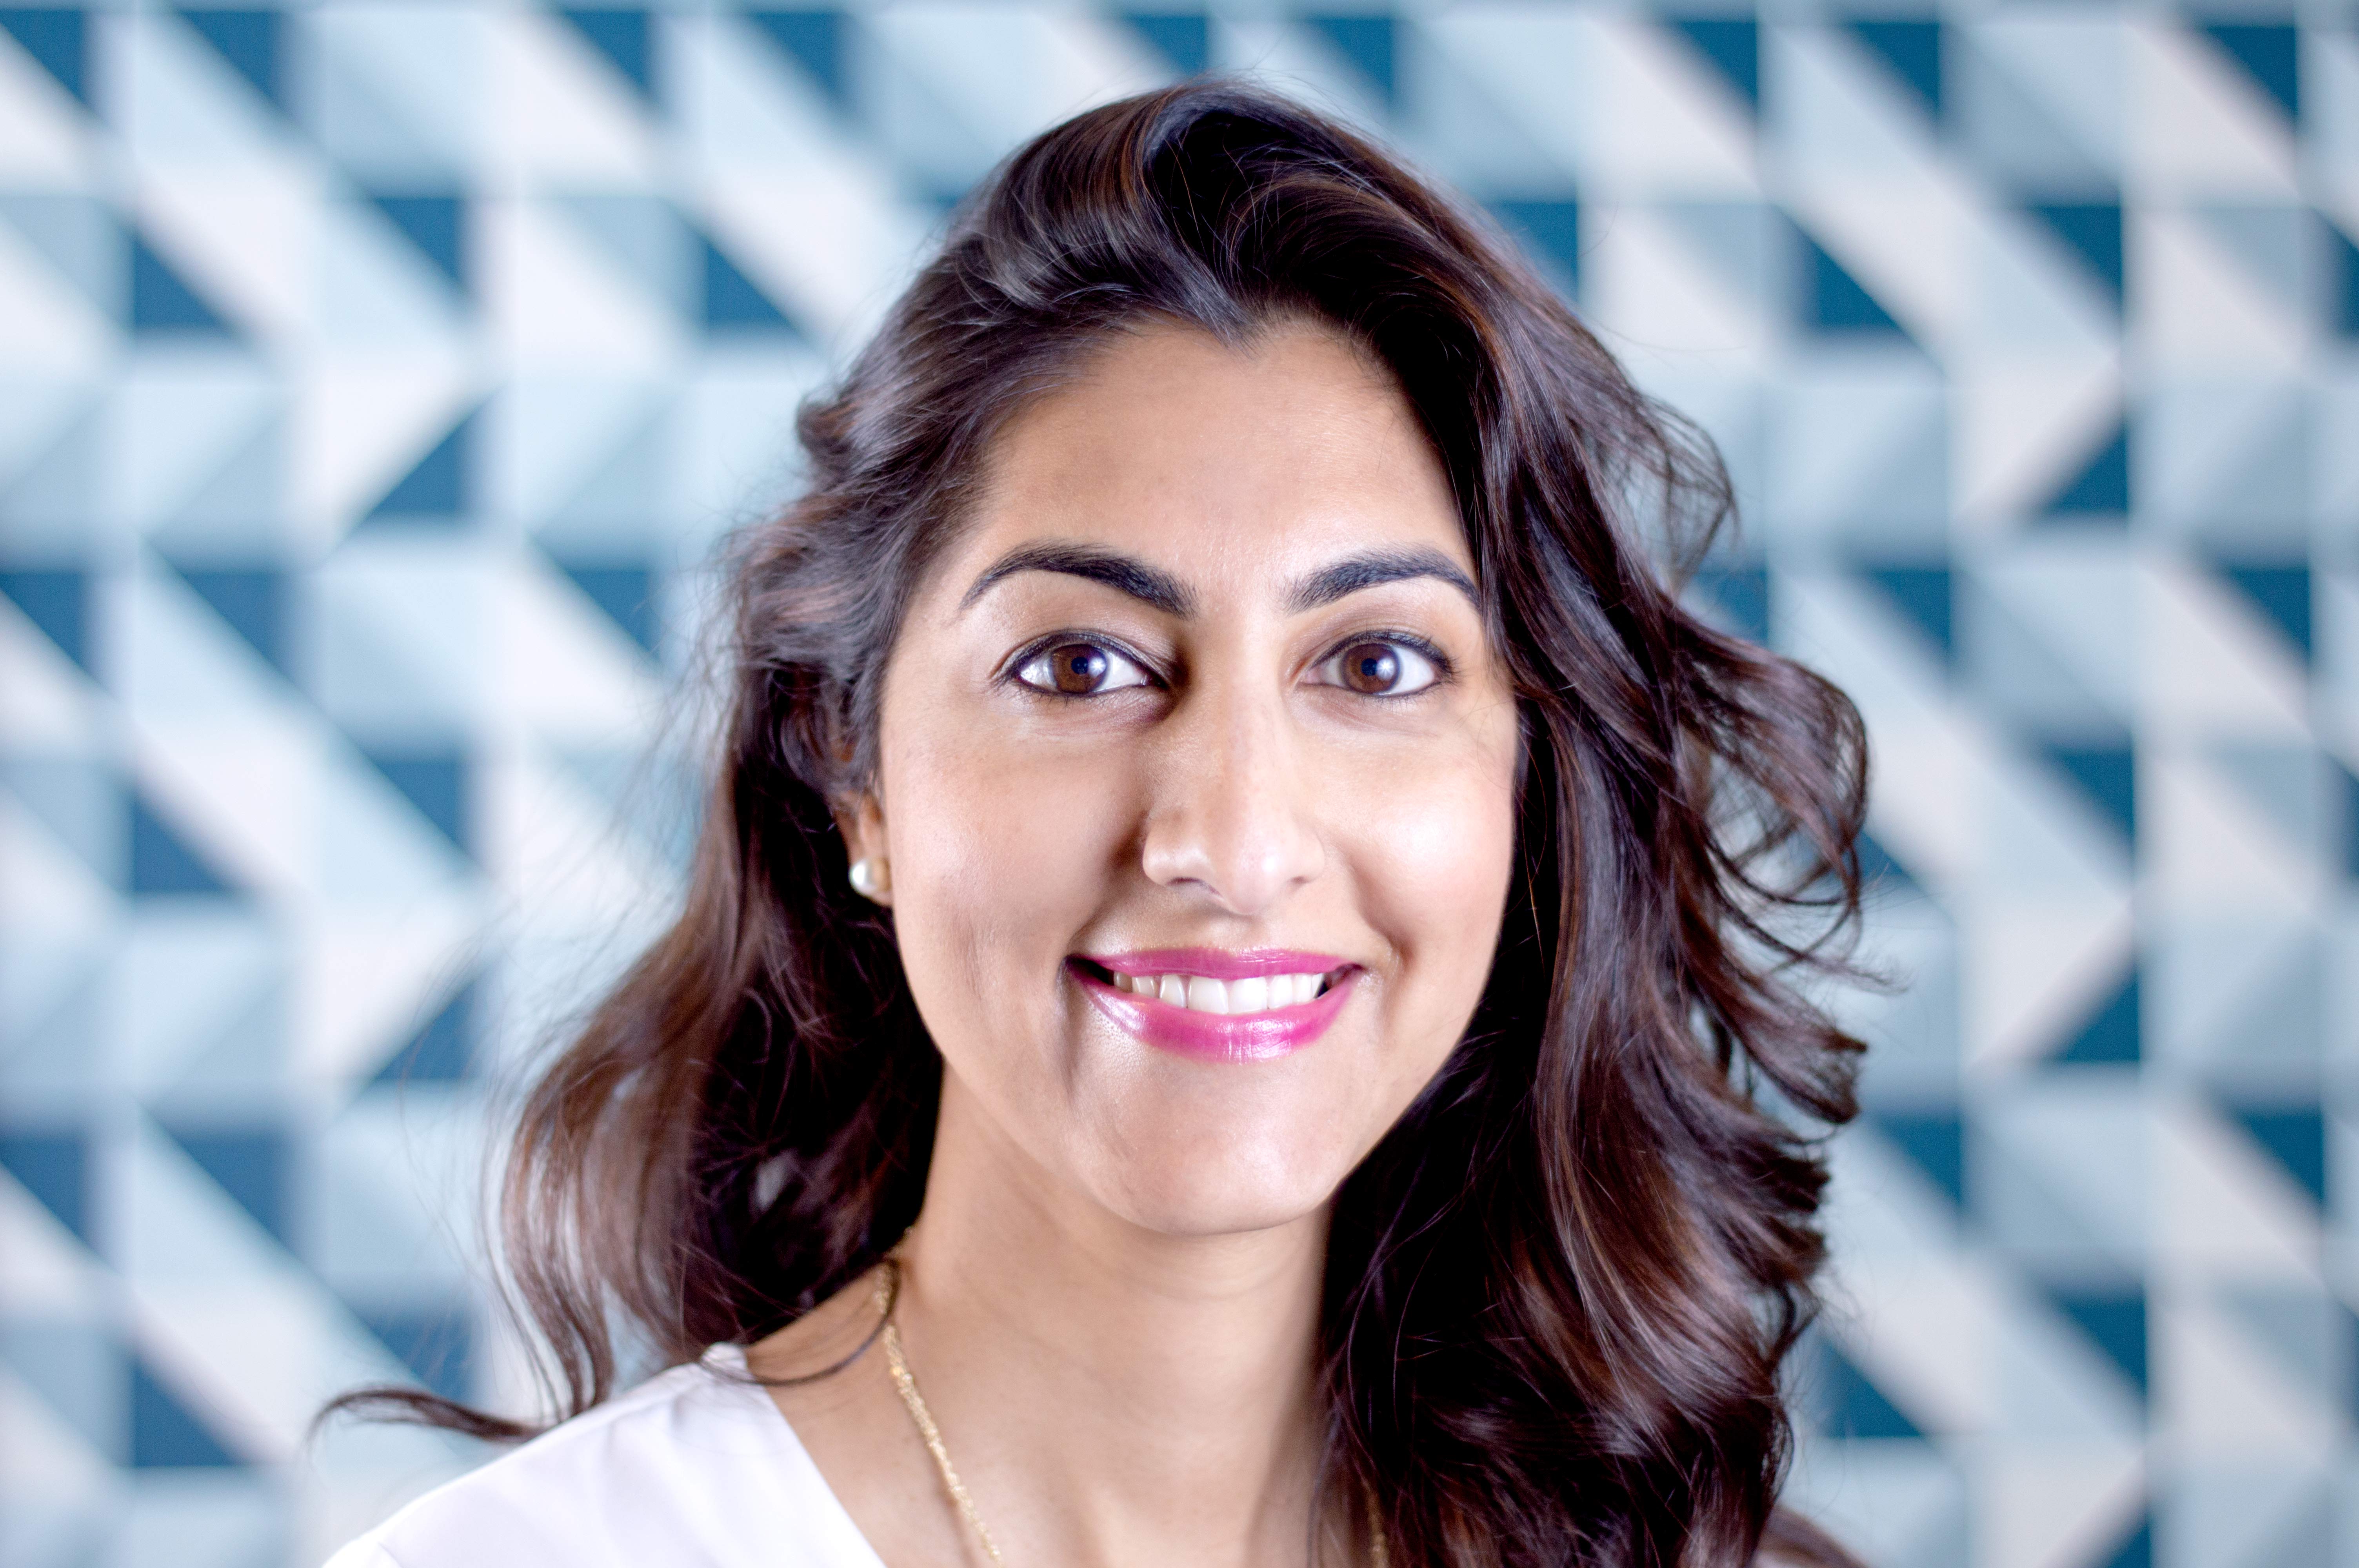 Luvleen Sidhu, Co-Founder and CEO of BankMobile